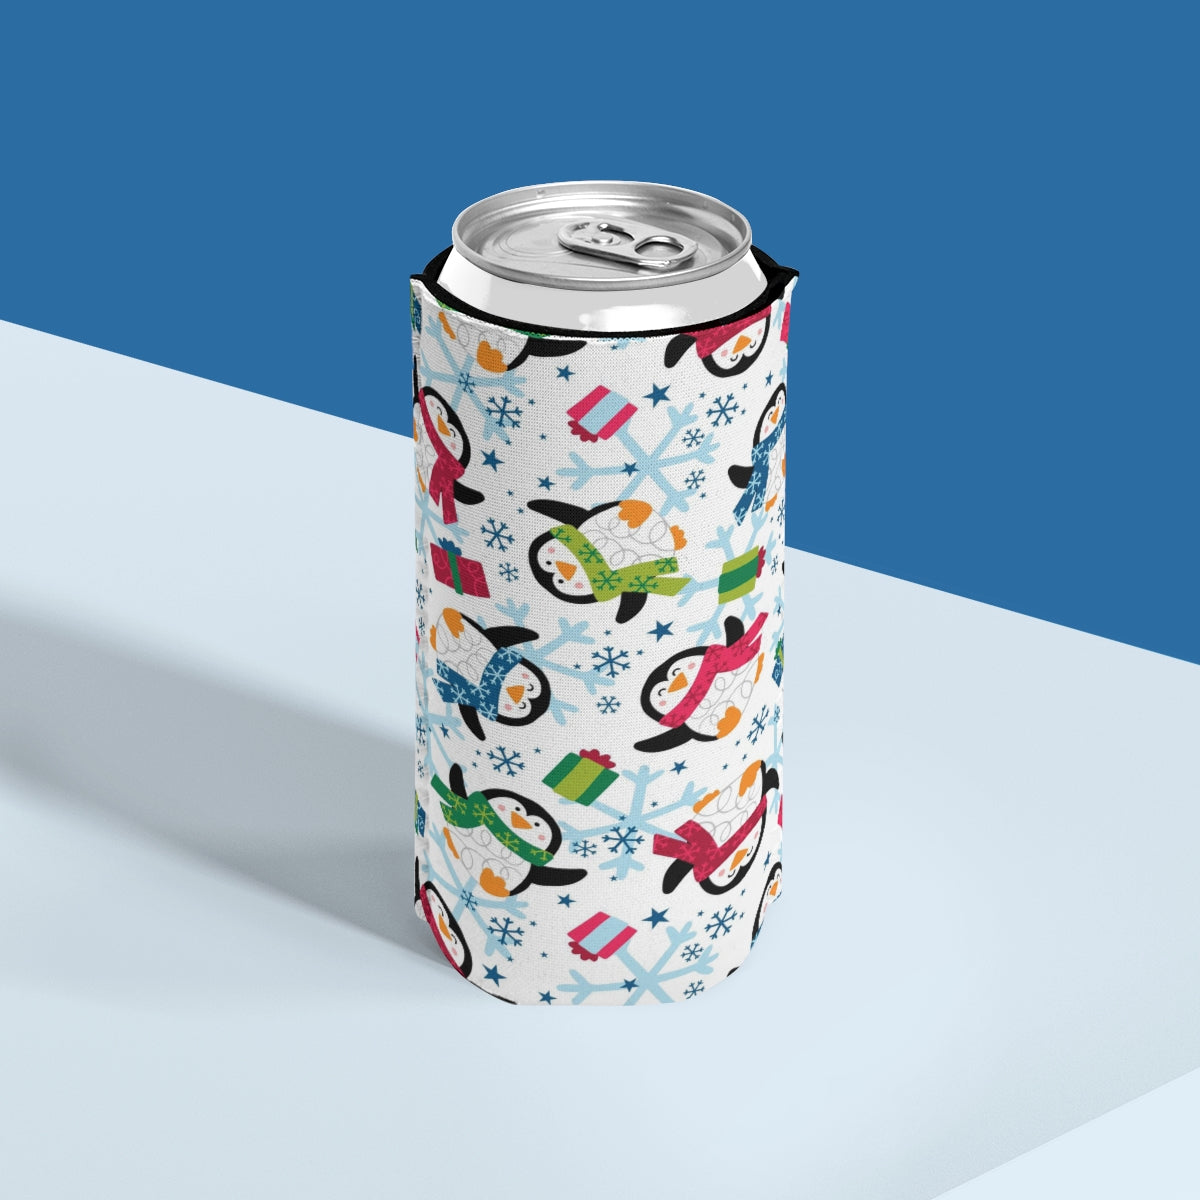 Penguins and Snowflakes Slim Can Cooler